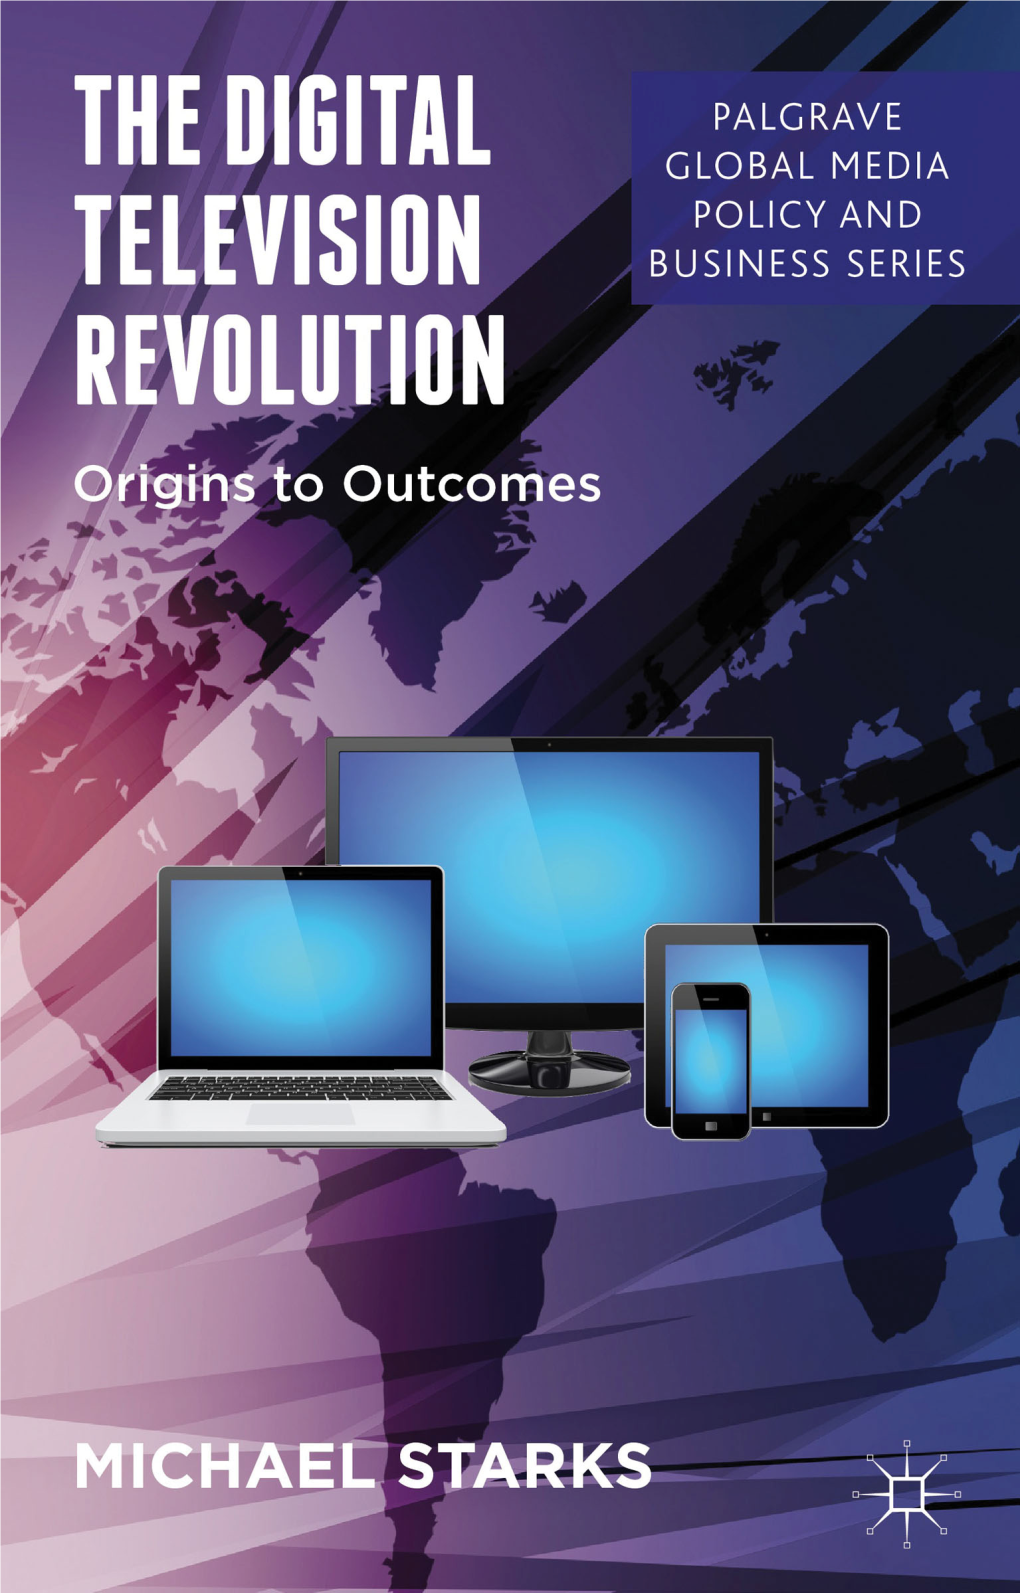 The Digital Television Revolution Palgrave Global Media Policy and Business